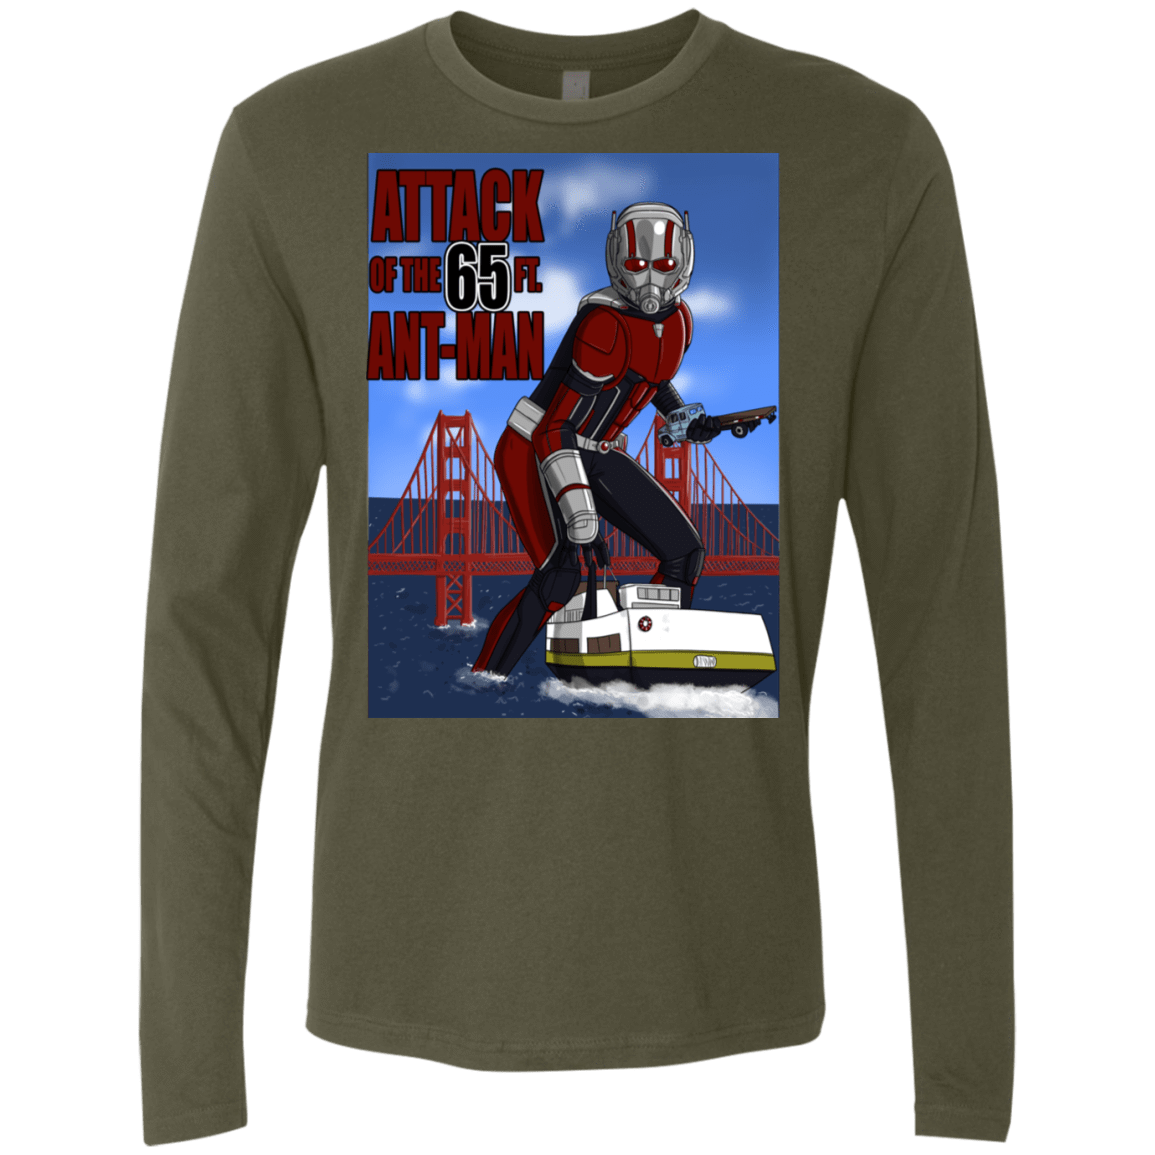 T-Shirts Military Green / S Attack of the 65 ft. Ant-Man Men's Premium Long Sleeve